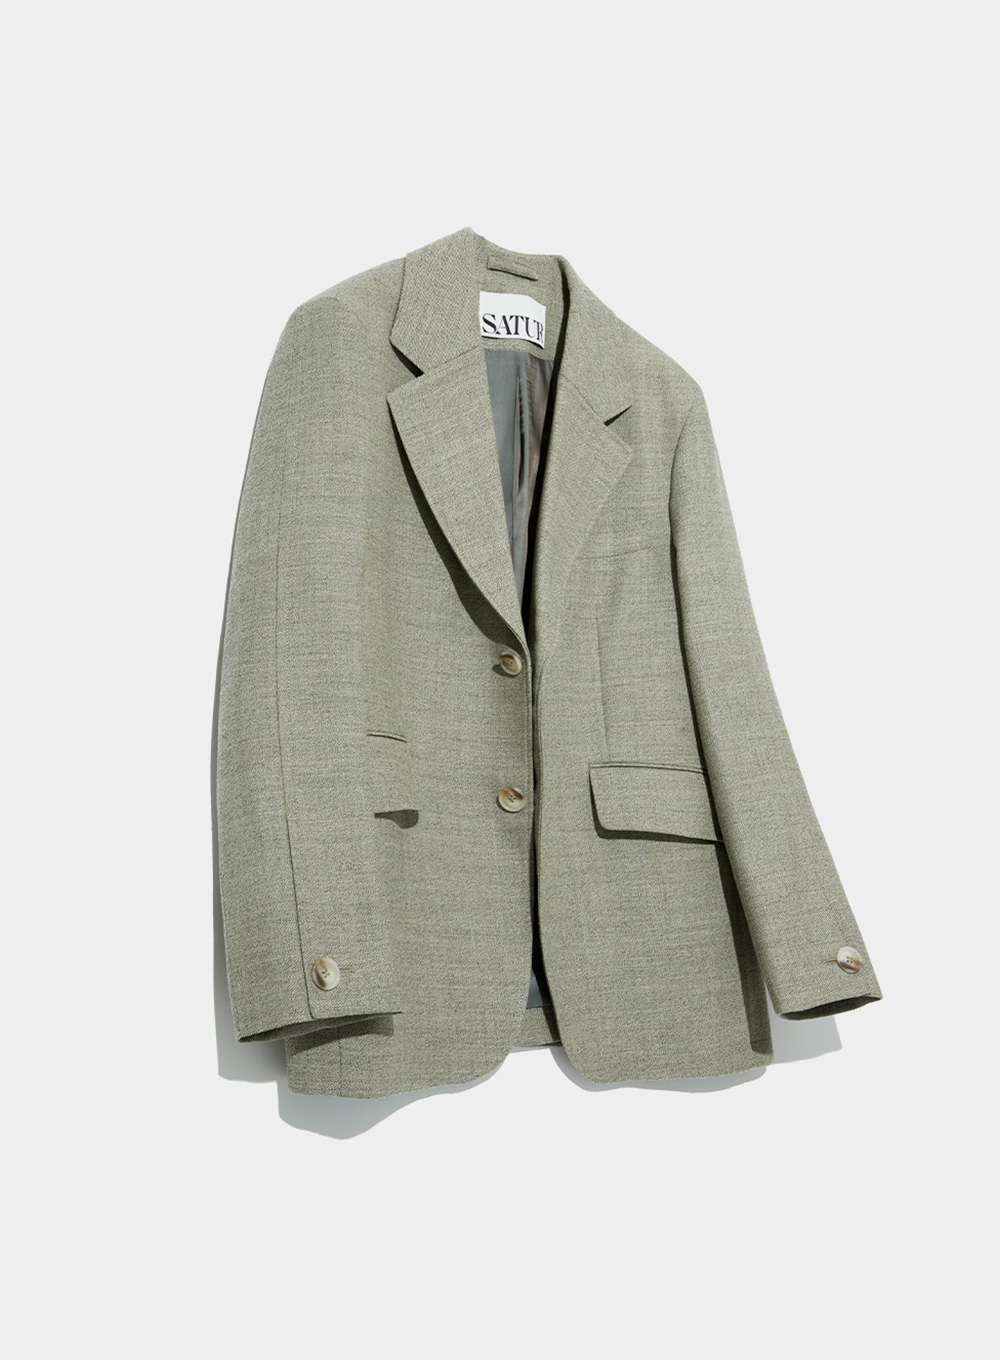 Quito Big Lapel Two Button Jacket Sage Green